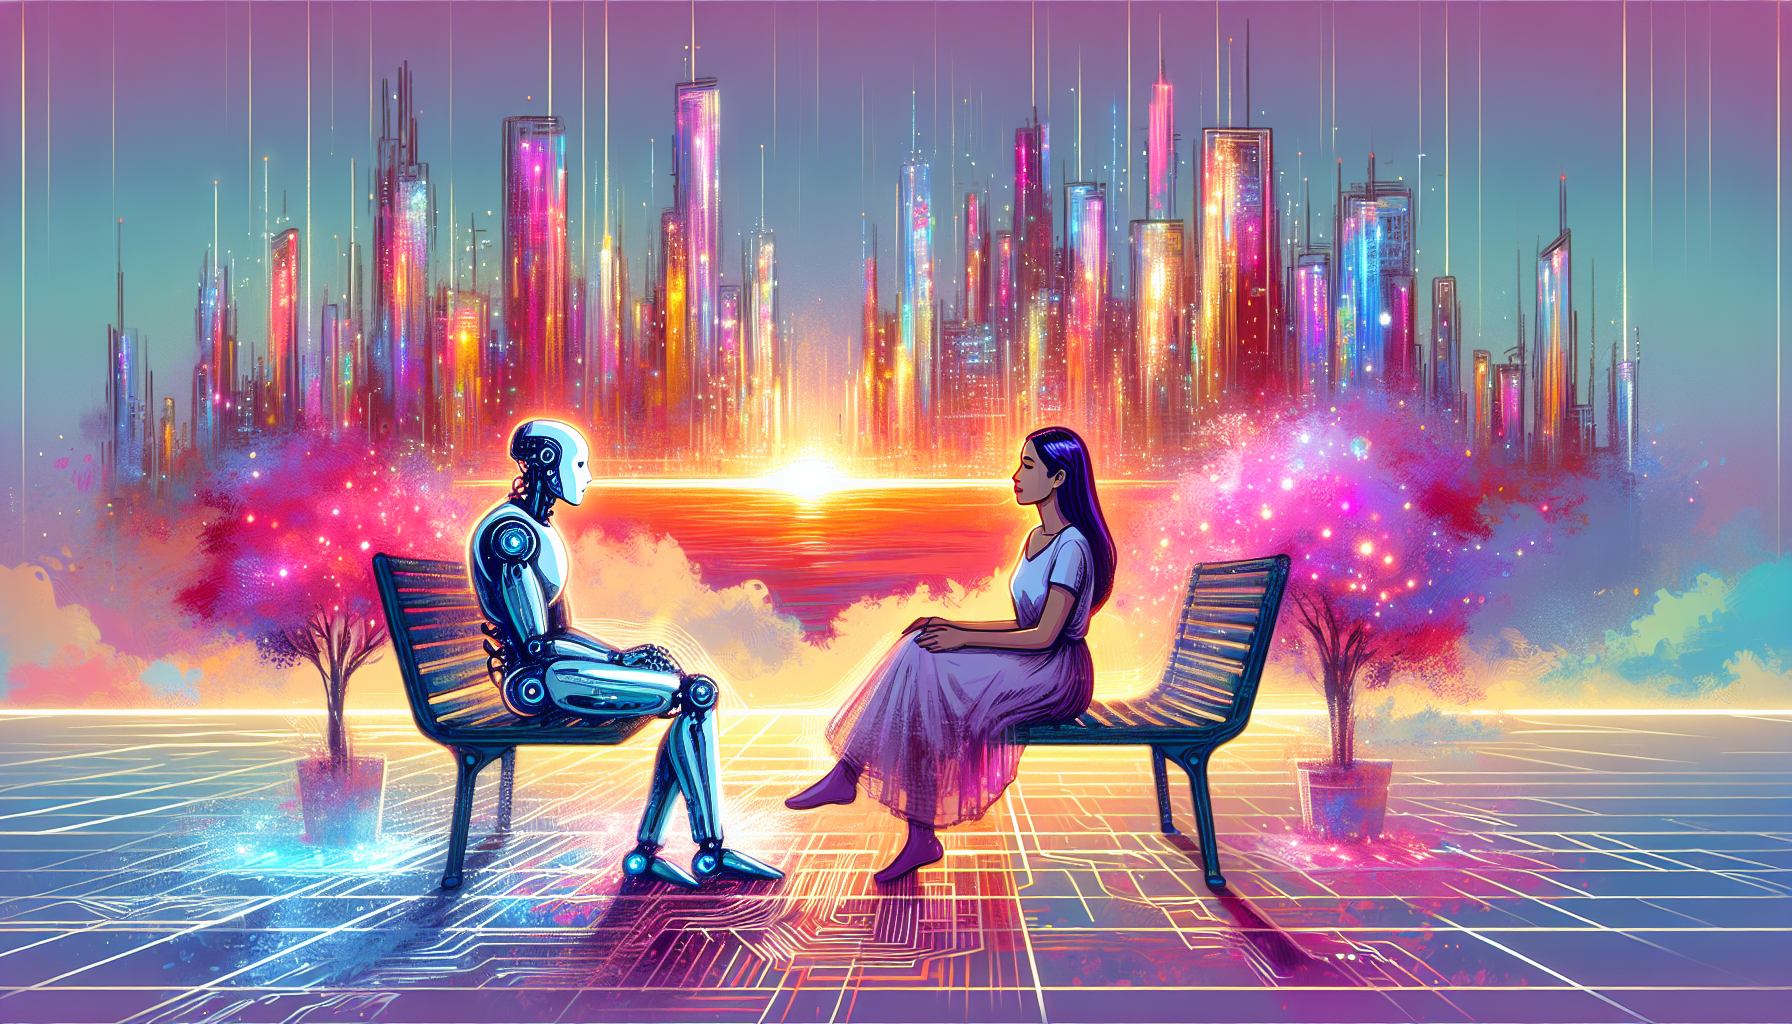 A whimsical, digital illustration showing a futuristic cityscape at sunset, where a diverse couple, consisting of a humanoid robot and a human, are sharing an intimate moment on a floating park bench,